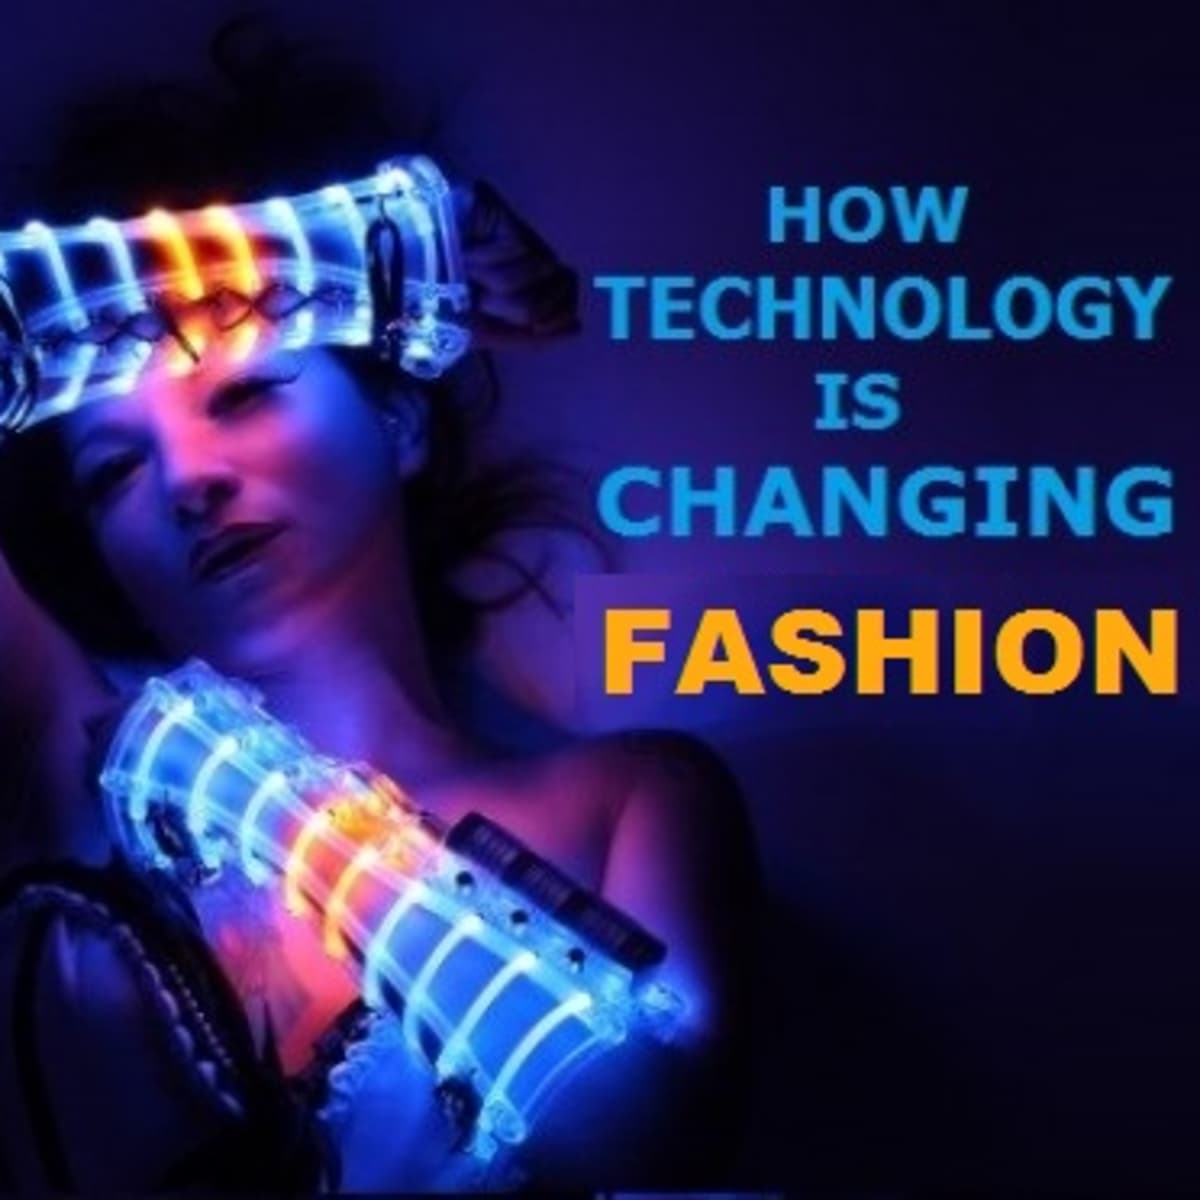 The Future of Fashion: The Latest Technologies to Know